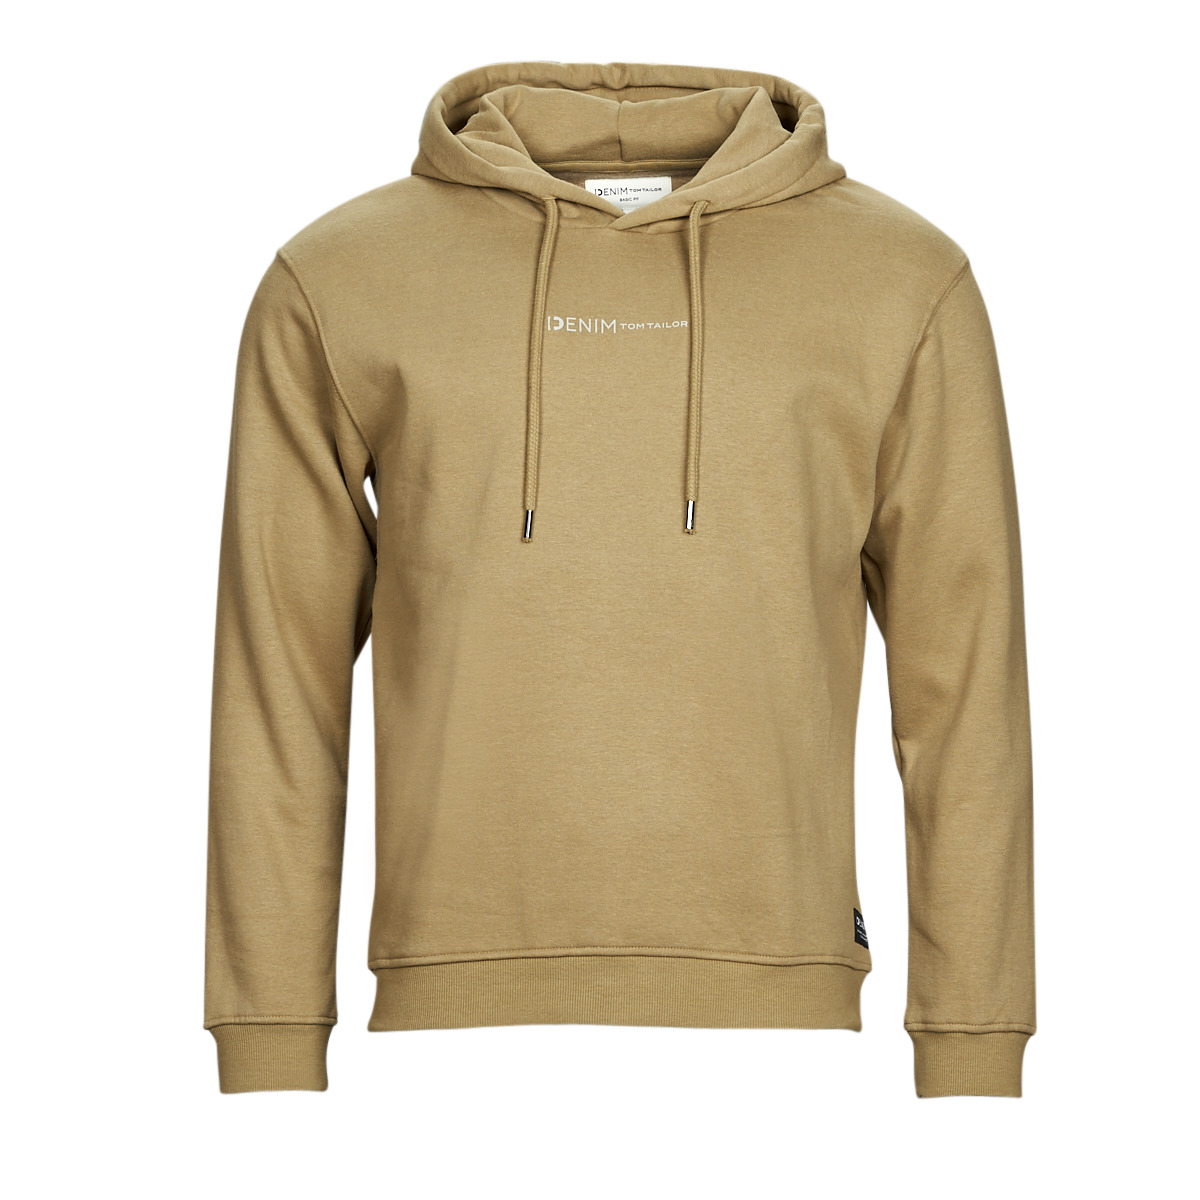 | Tom Camel Men Clothing Europe Tailor Spartoo - - HOODIE sweaters delivery 44,00 € Fast !